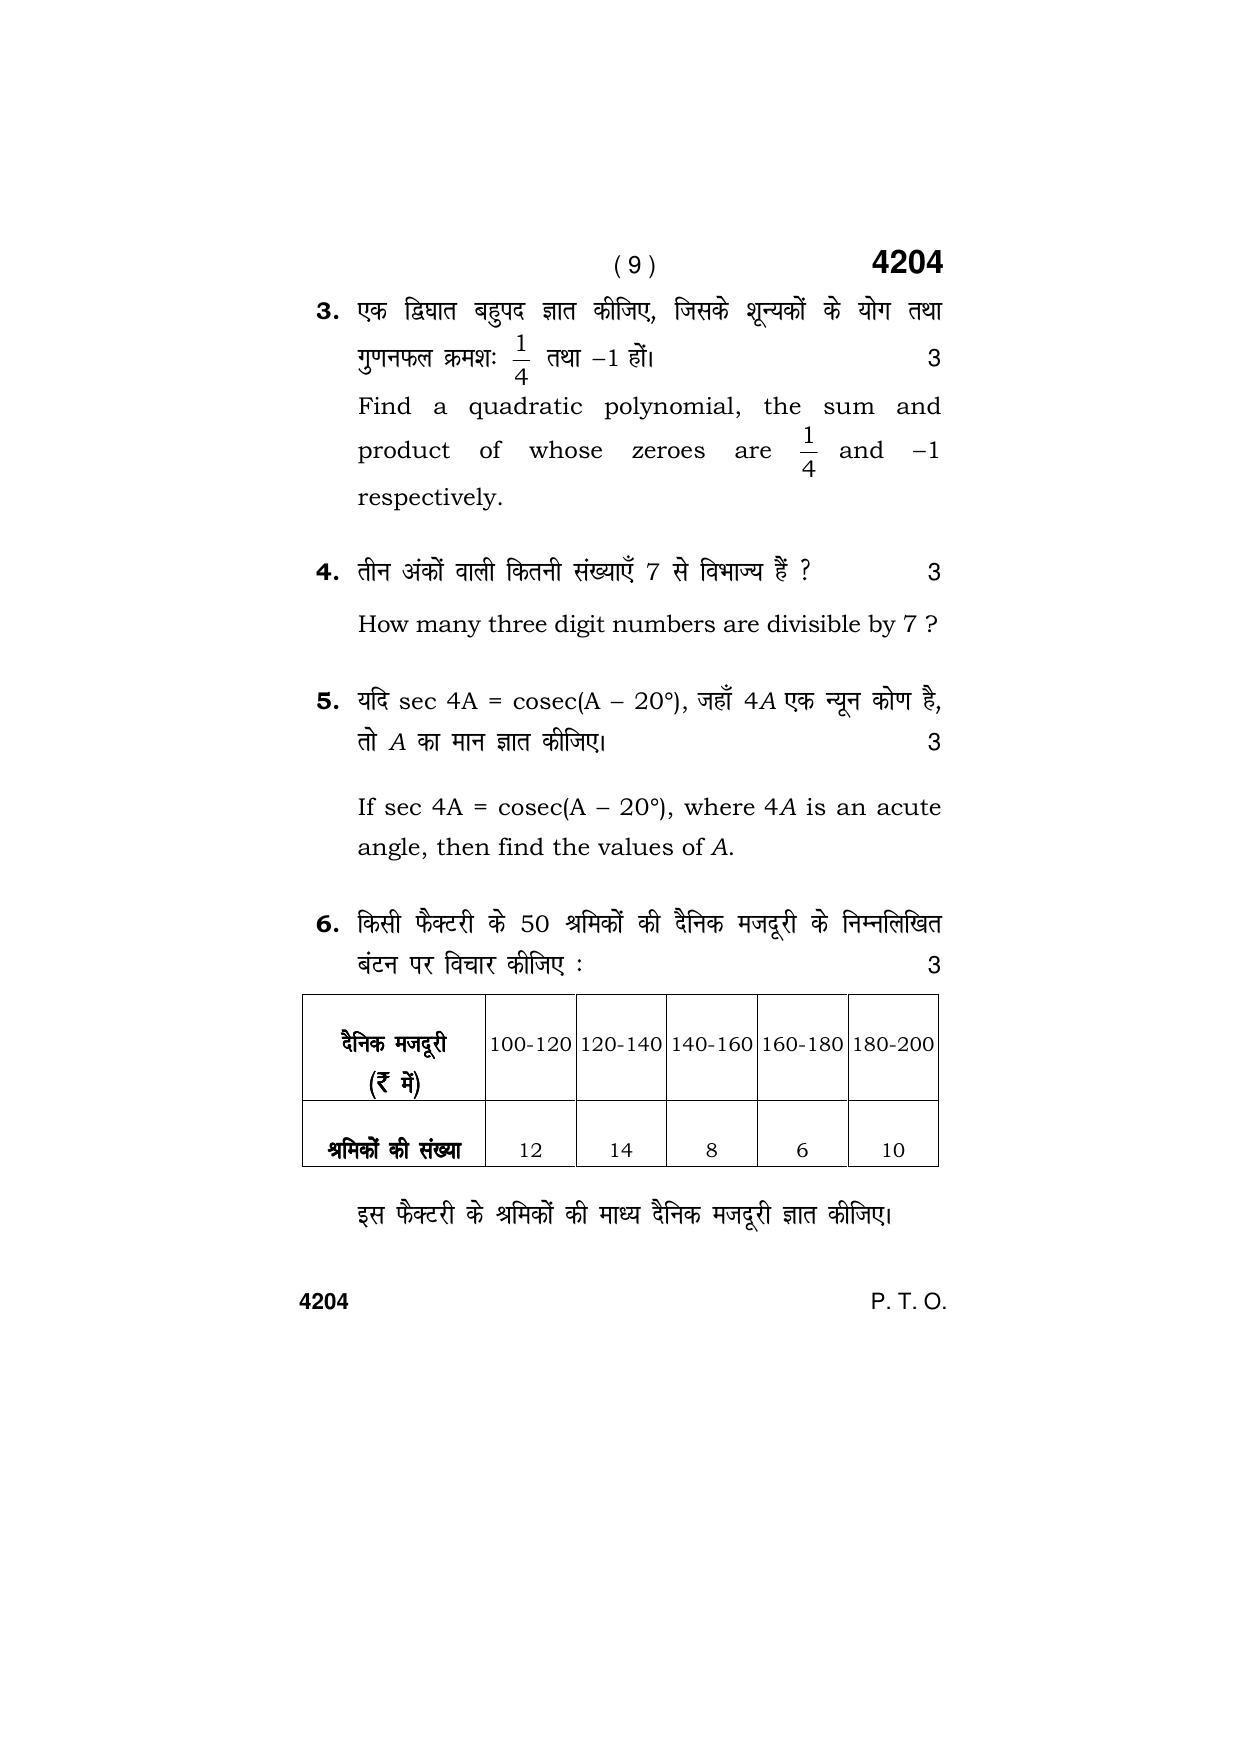 Haryana Board HBSE Class 10 Mathematics (Blind c) 2019 Question Paper - Page 9